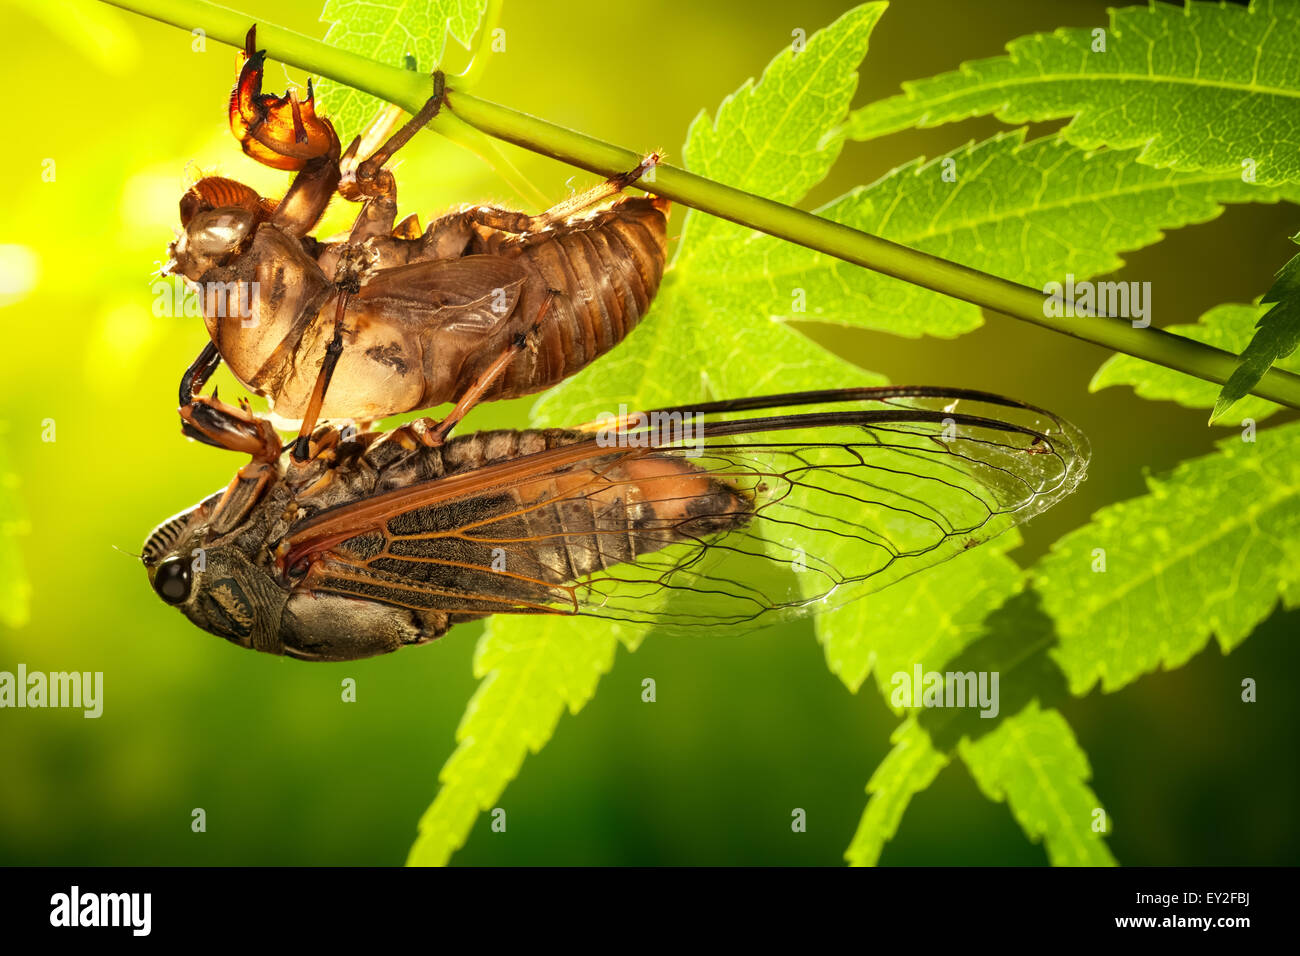 Cicada metamorphosis (Latin Cicadidae),Last molt - the transformation into an adult insect. Stock Photo